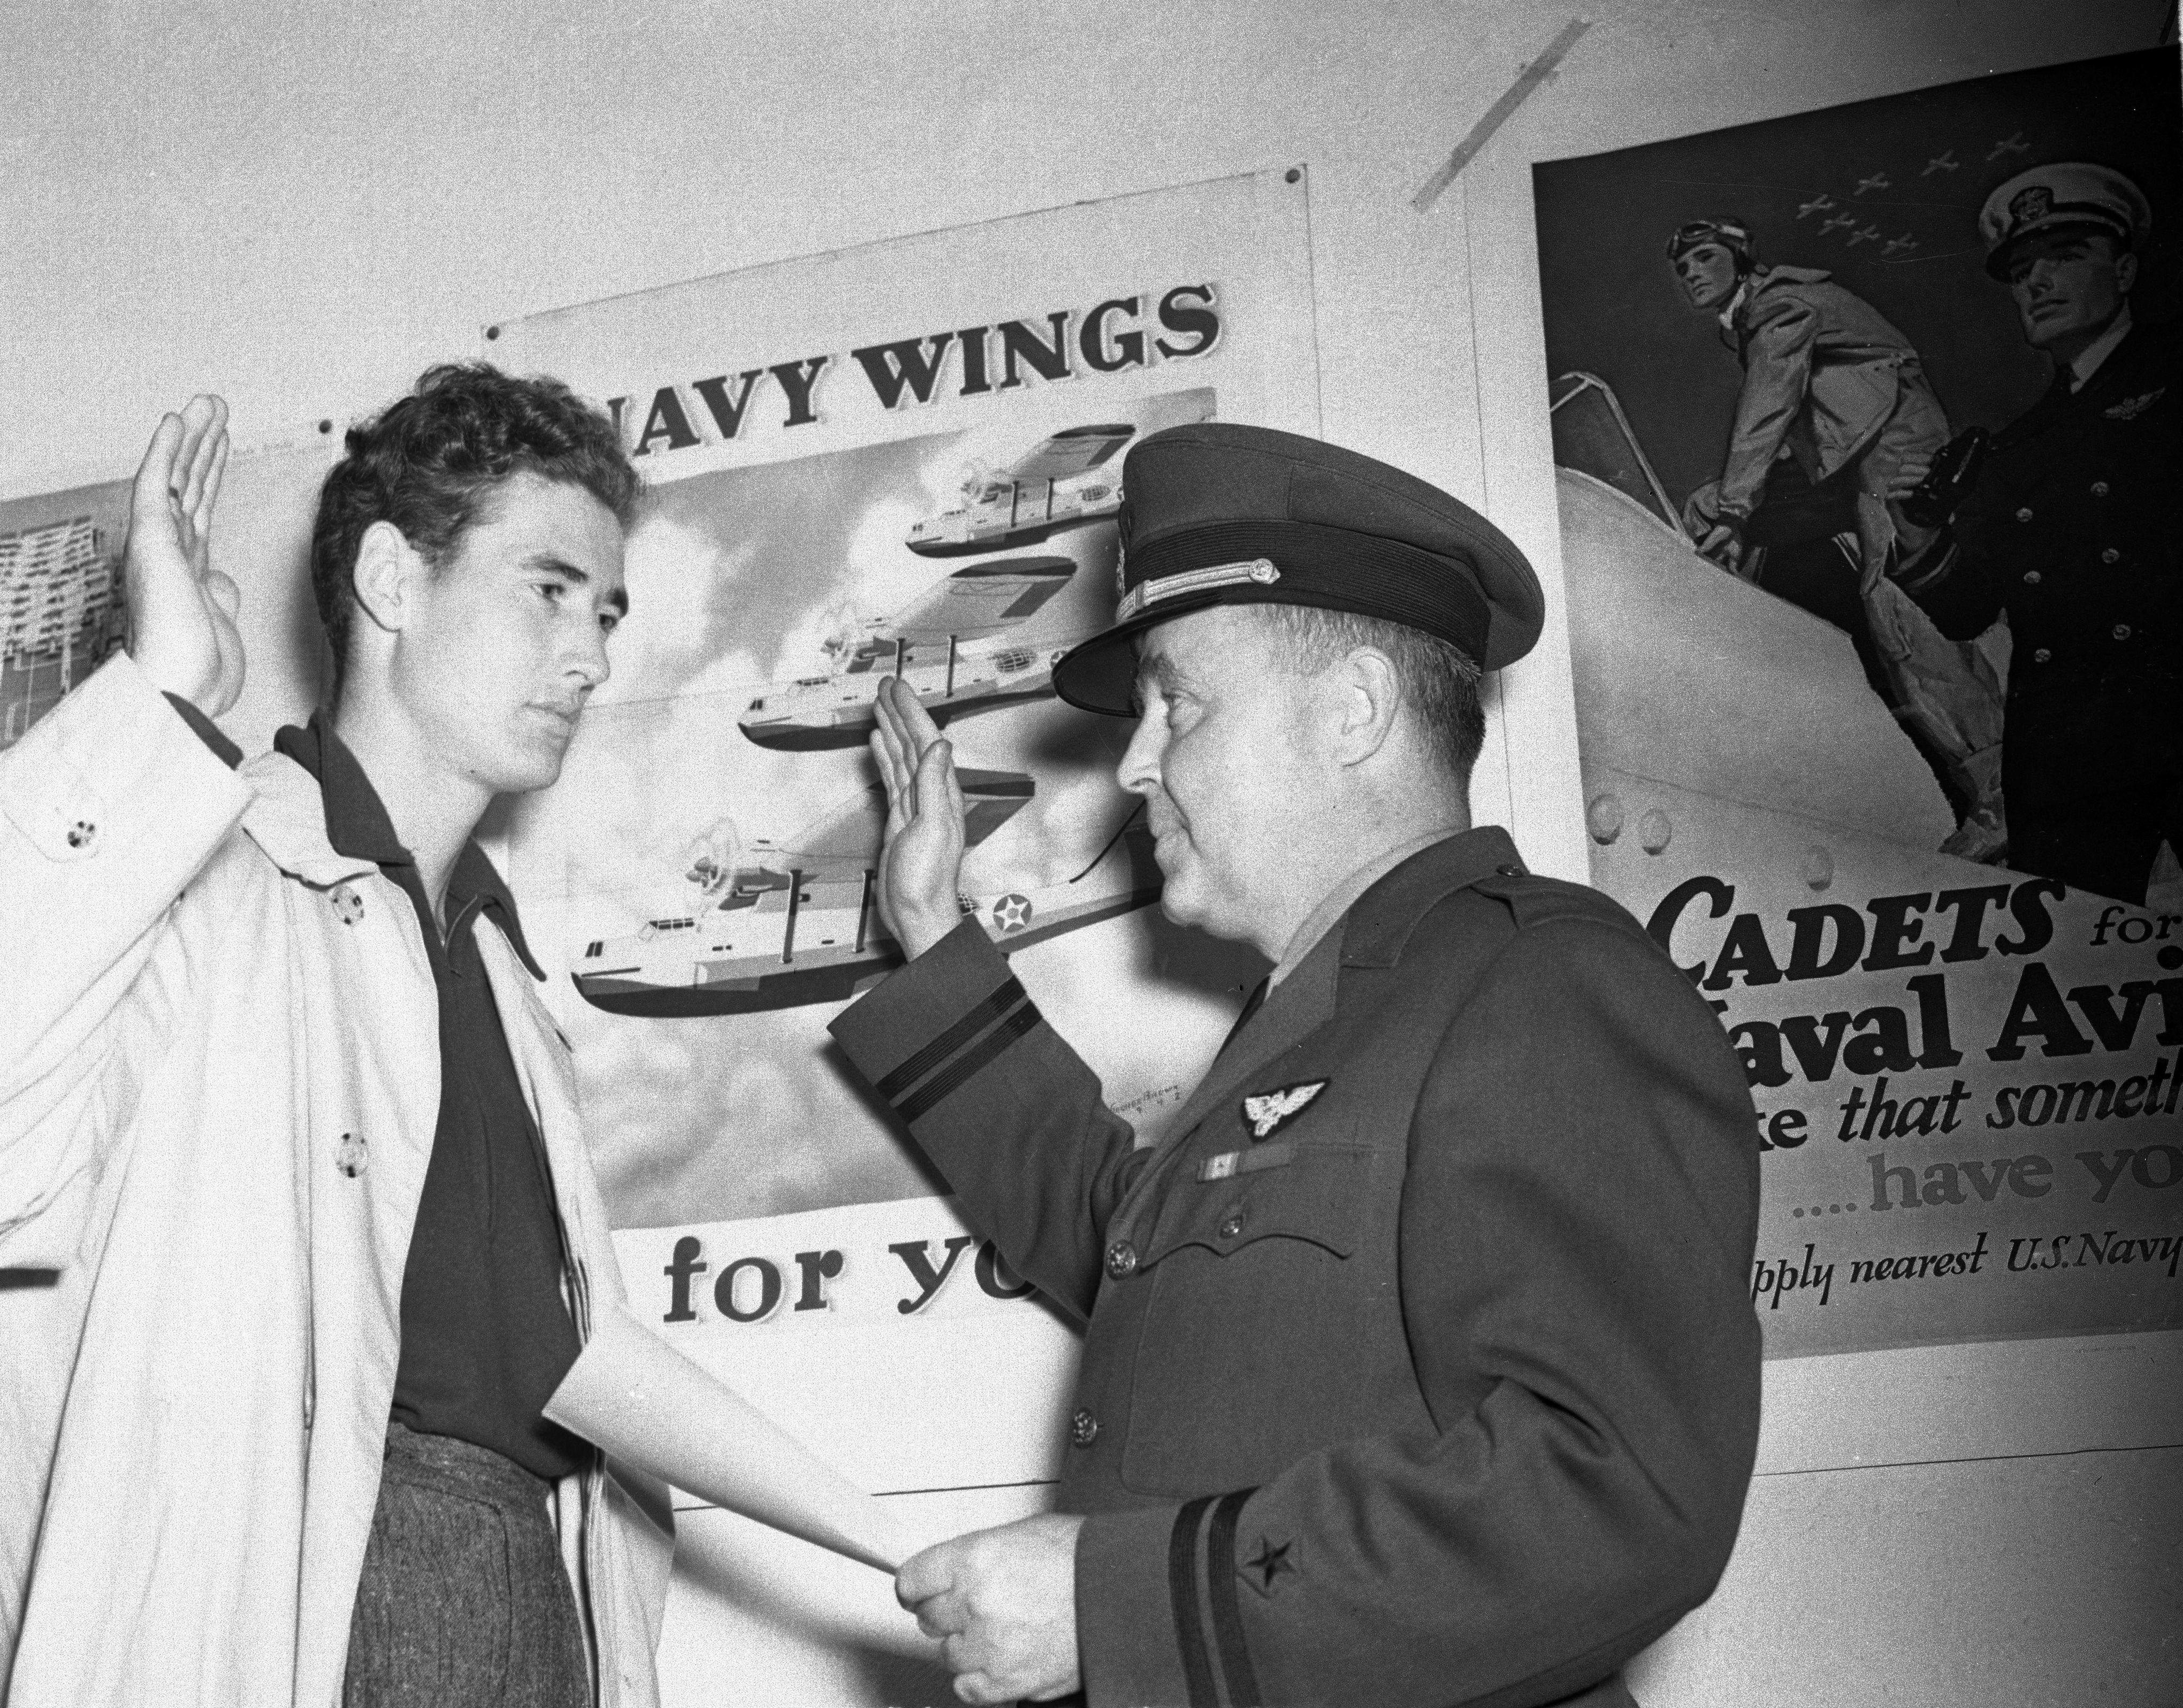 Ted Williams saluting officer